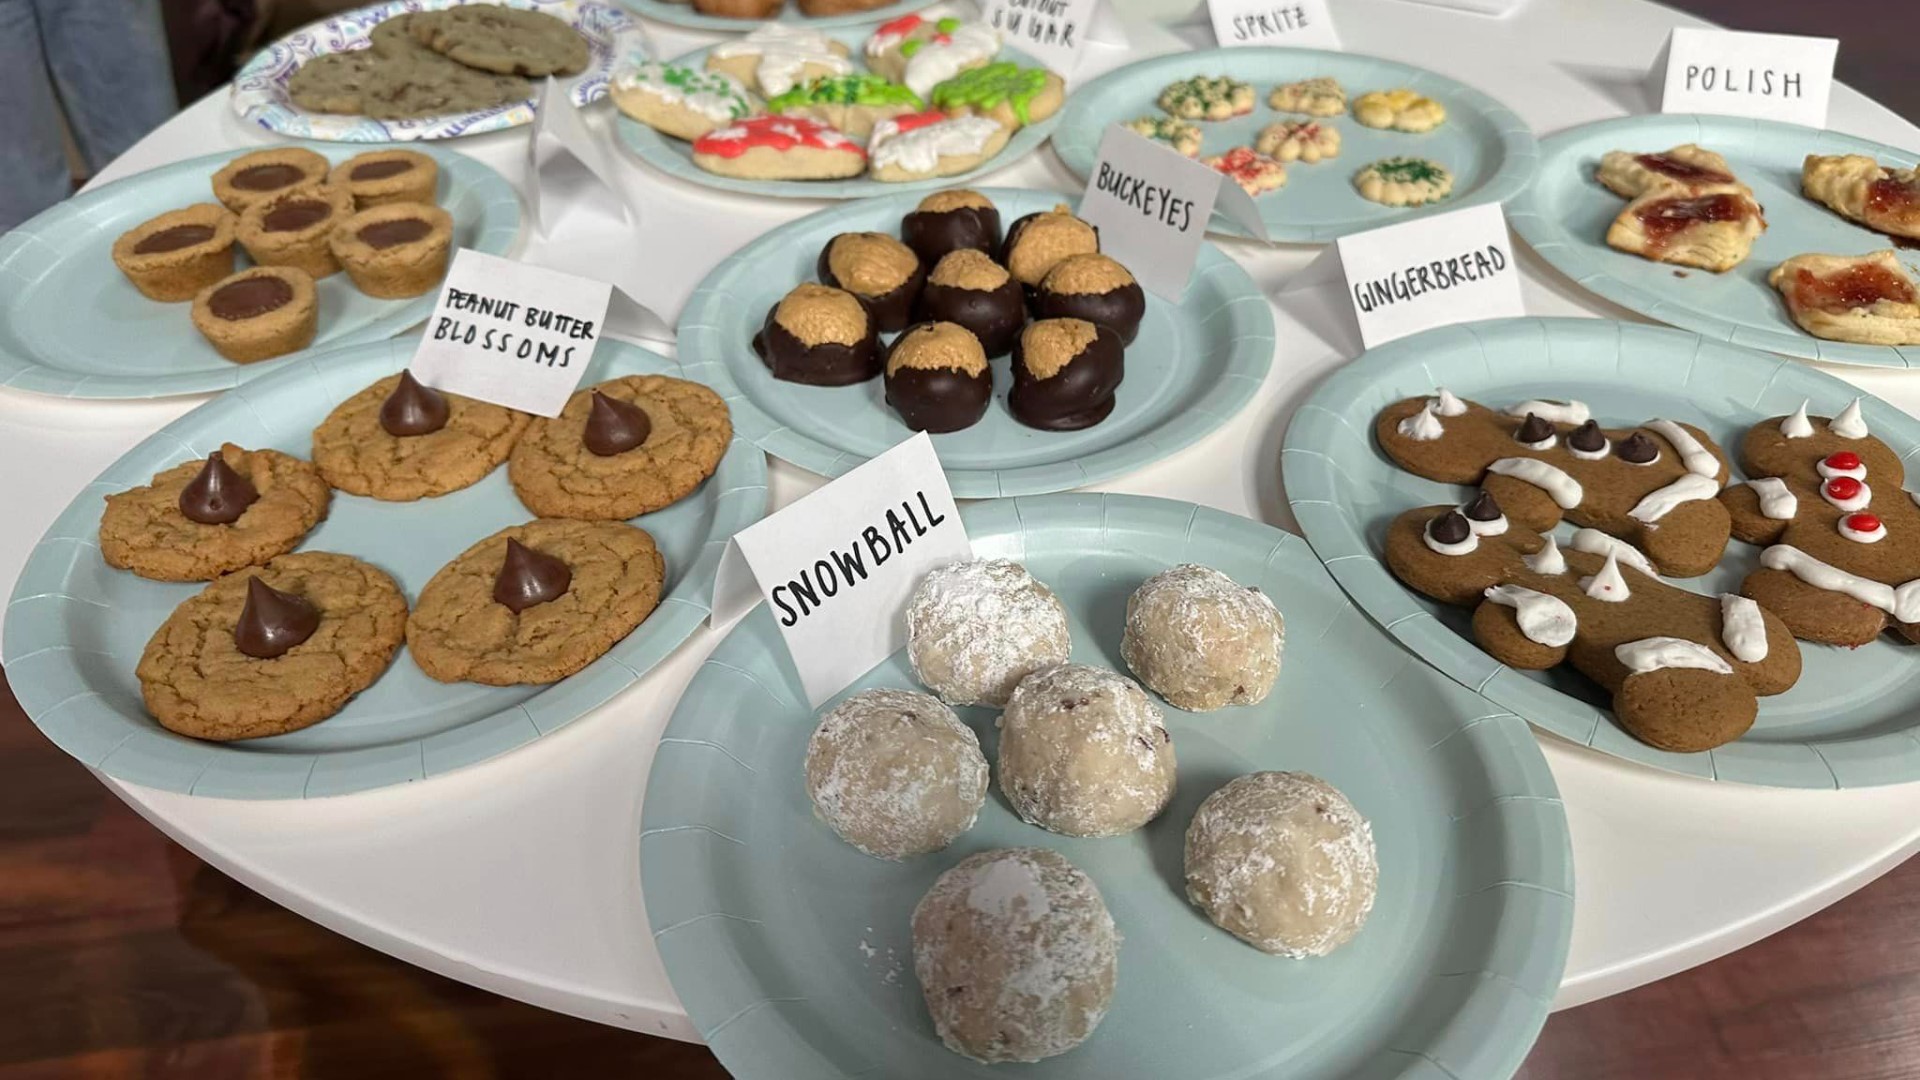 13 ON YOUR SIDE's Riley Mack, Alana Holland and Steven Bohner rank West Michigan' favorite holiday cookies in a special called "Holiday Cookie Snowdown".